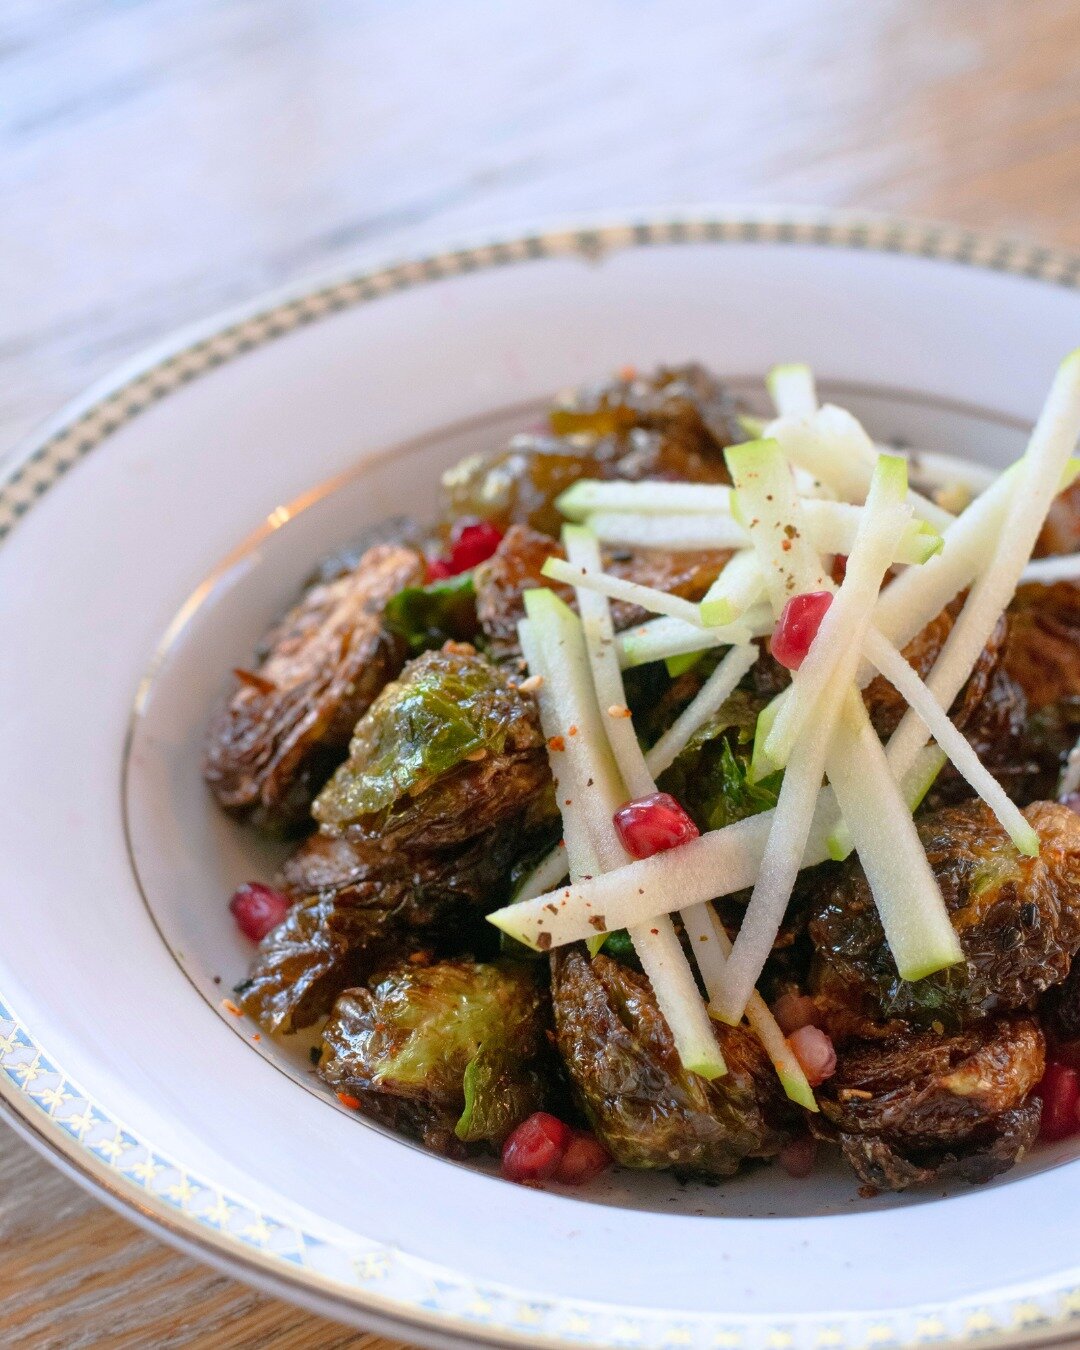 This Week At Comus
Enjoy the last week of live music with us Fri and Sat!

Thursday: Trivia

Live Music Schedule

Friday: Hepcat Hoodie 

Saturday: Rule G

Featured Dish: Sweet and Sour Brussel Sprouts
Crispy fried brussel sprouts, togarashi gastriqu